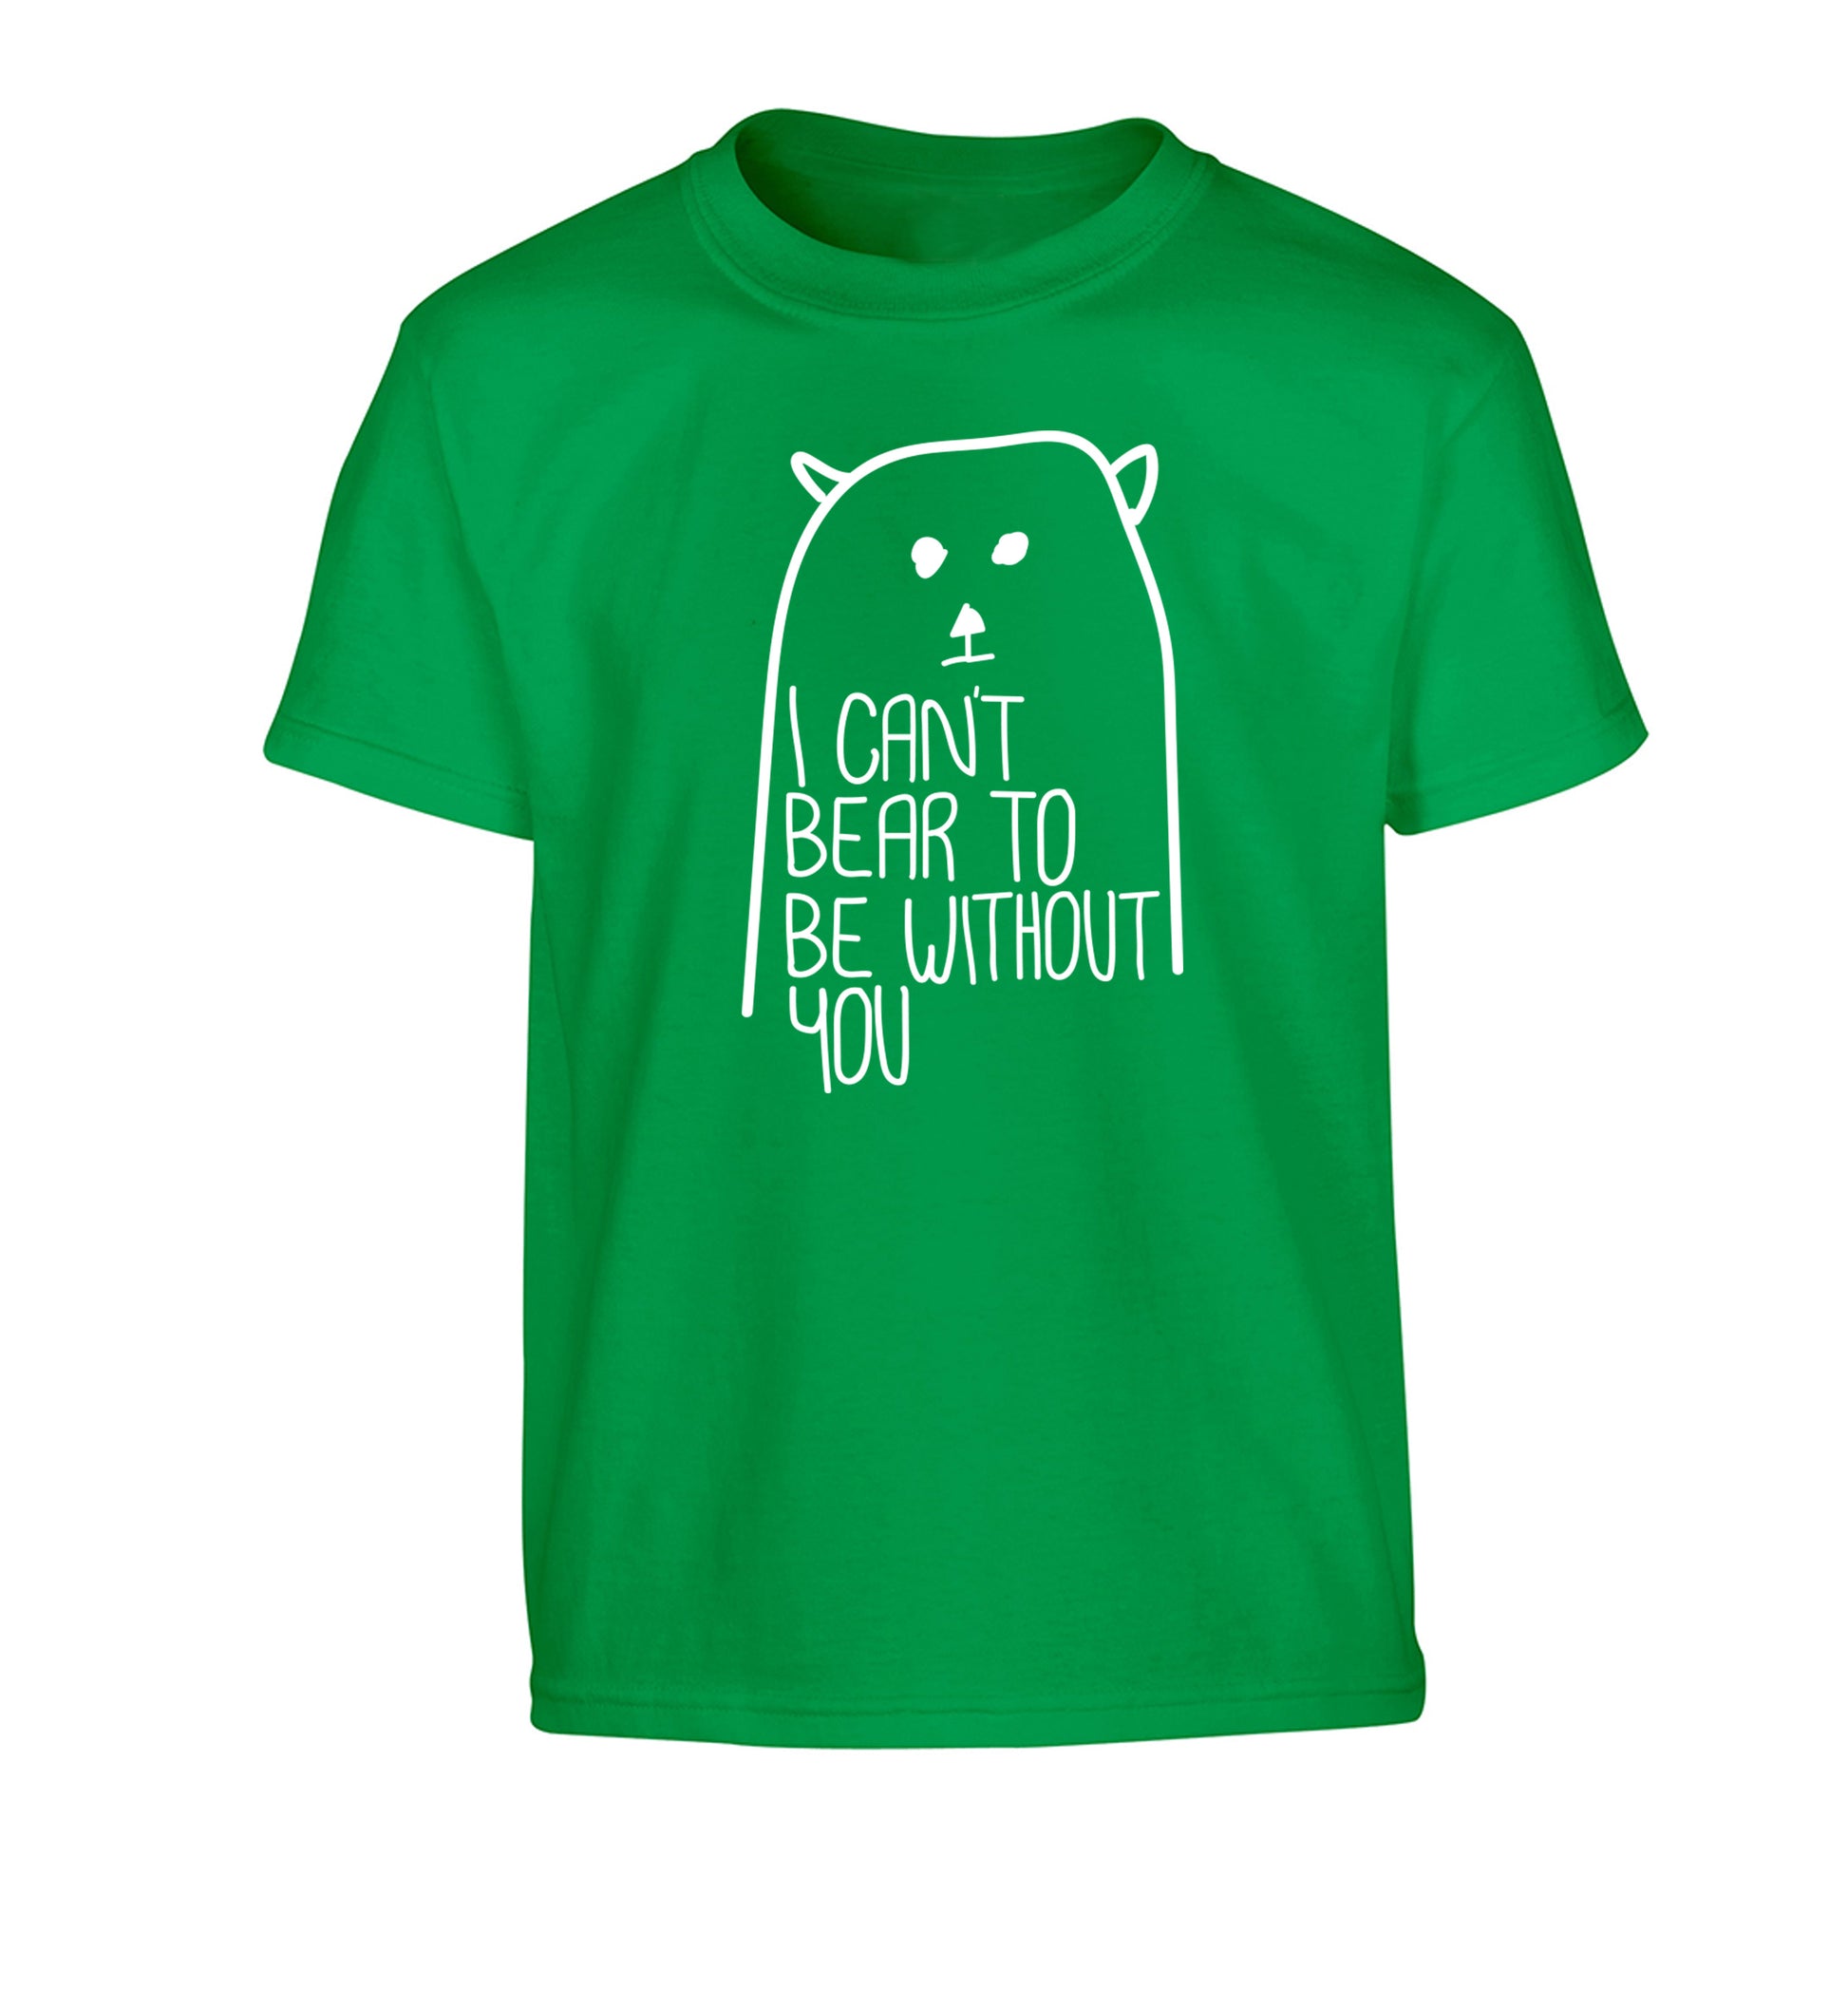 I can't bear to be without you Children's green Tshirt 12-13 Years